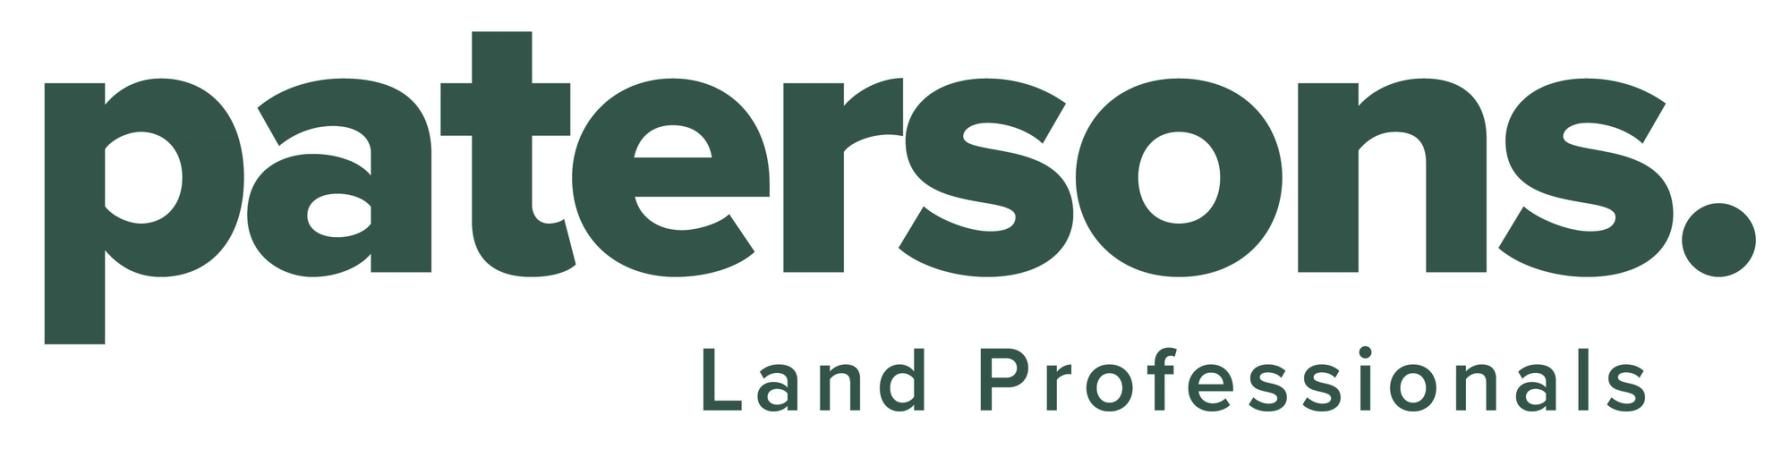 Patersons Land Professionals 